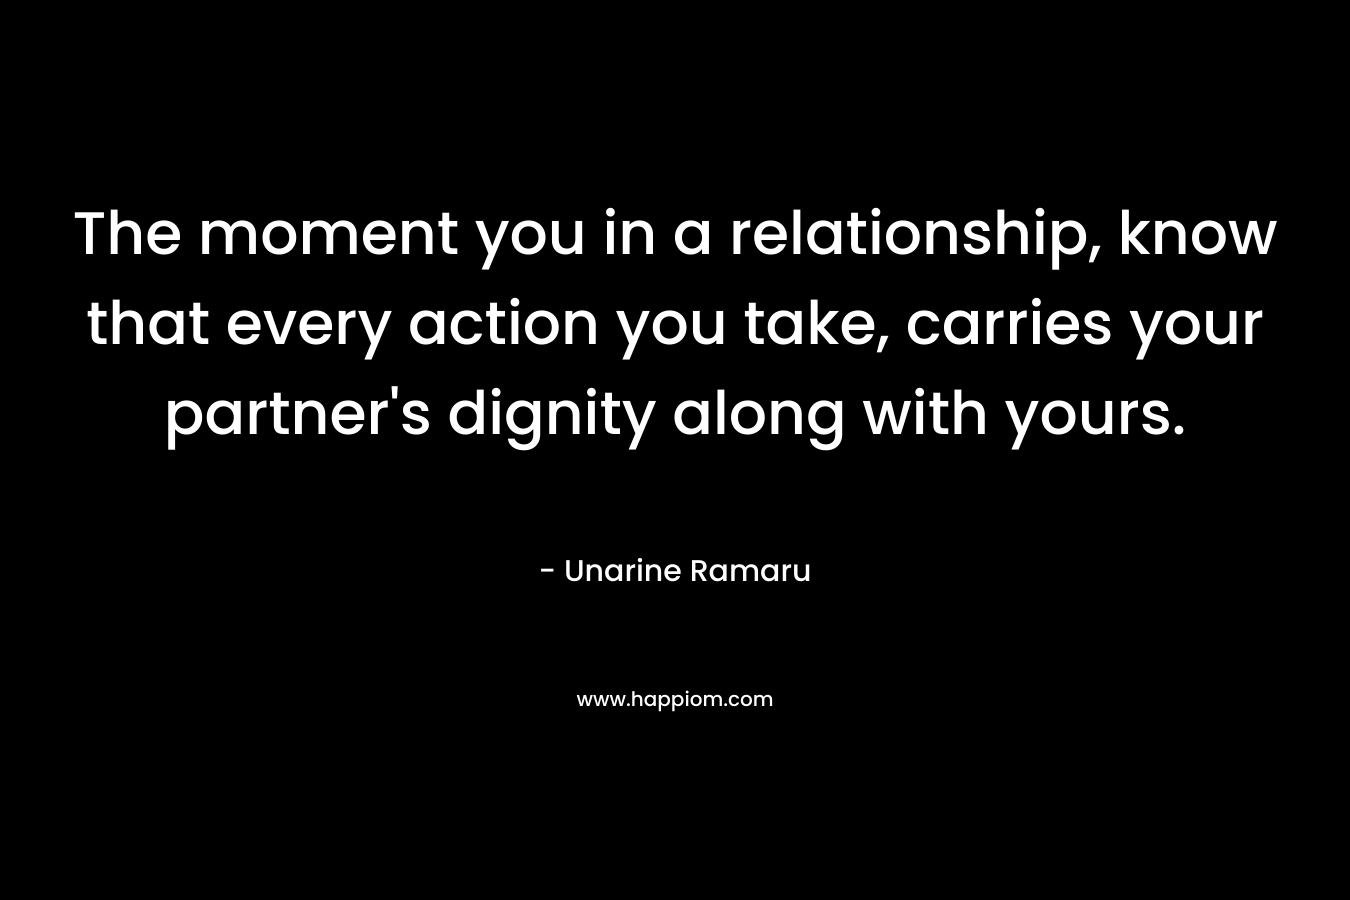 The moment you in a relationship, know that every action you take, carries your partner’s dignity along with yours. – Unarine Ramaru